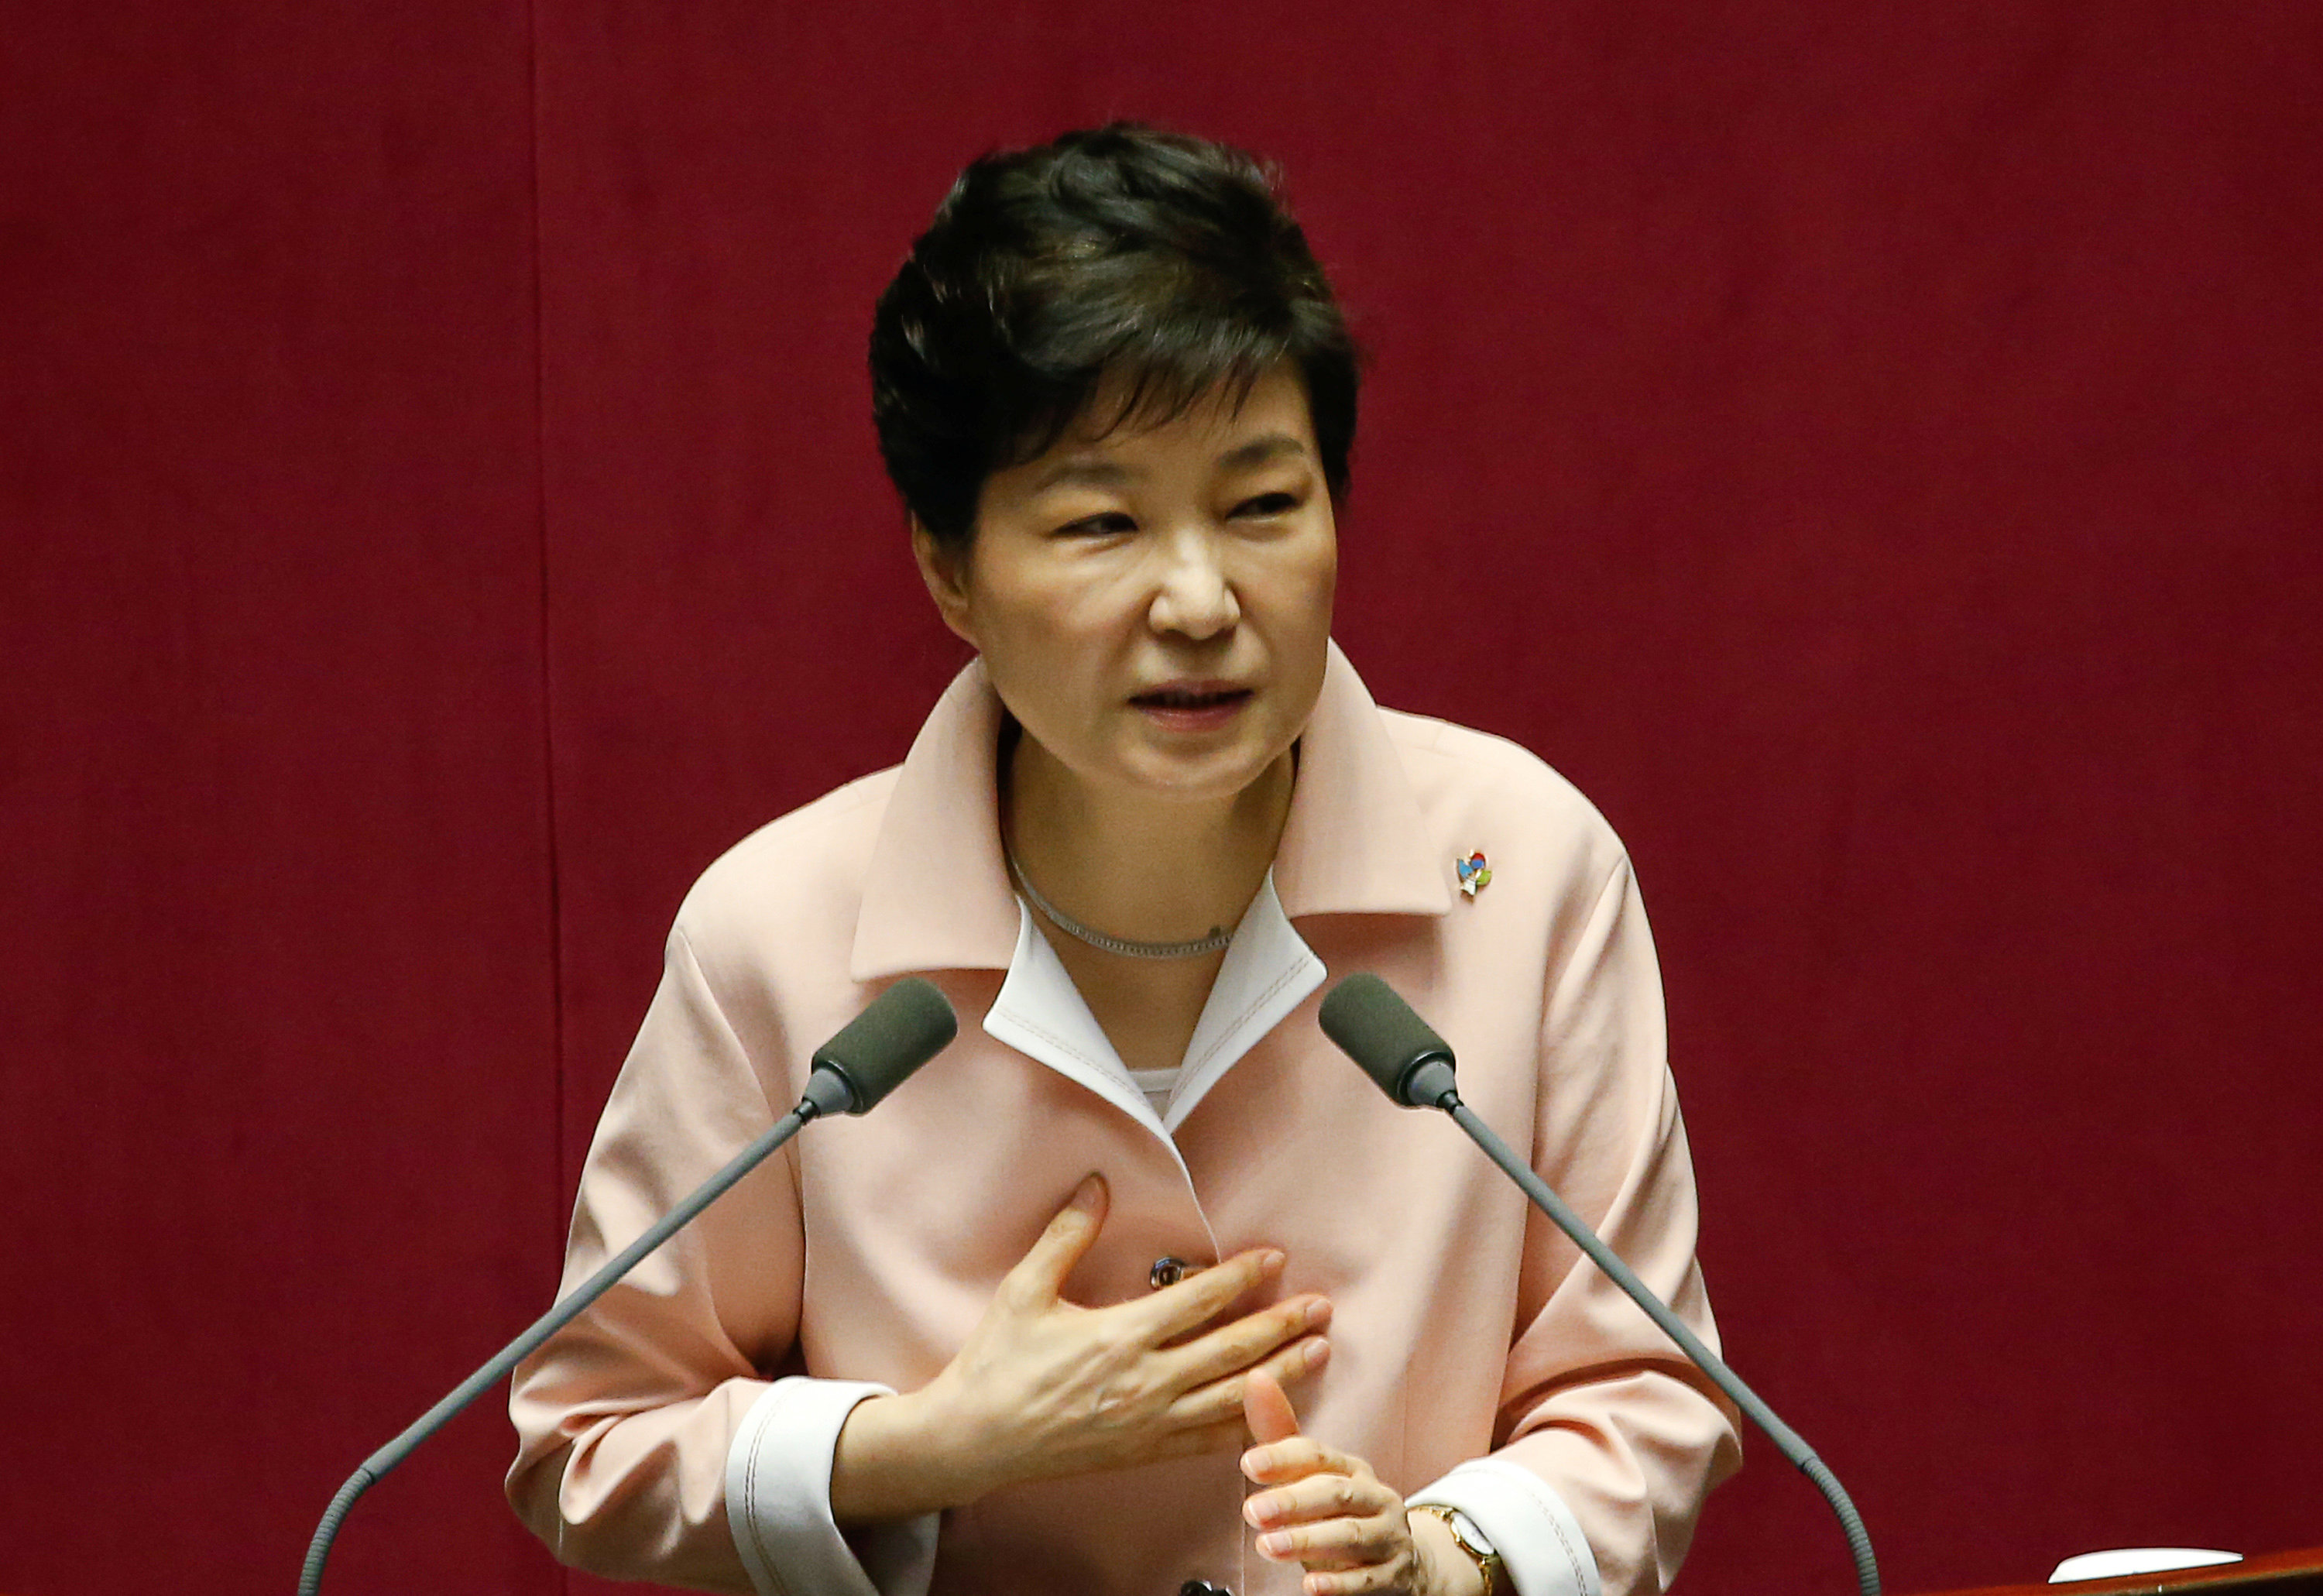 South Korean President Park Geun-hye delivers her speech during the inaugural session of the 20th National Assembly in Seoul, South Korea, June 13, 2016. REUTERS/Kim Hong-Ji